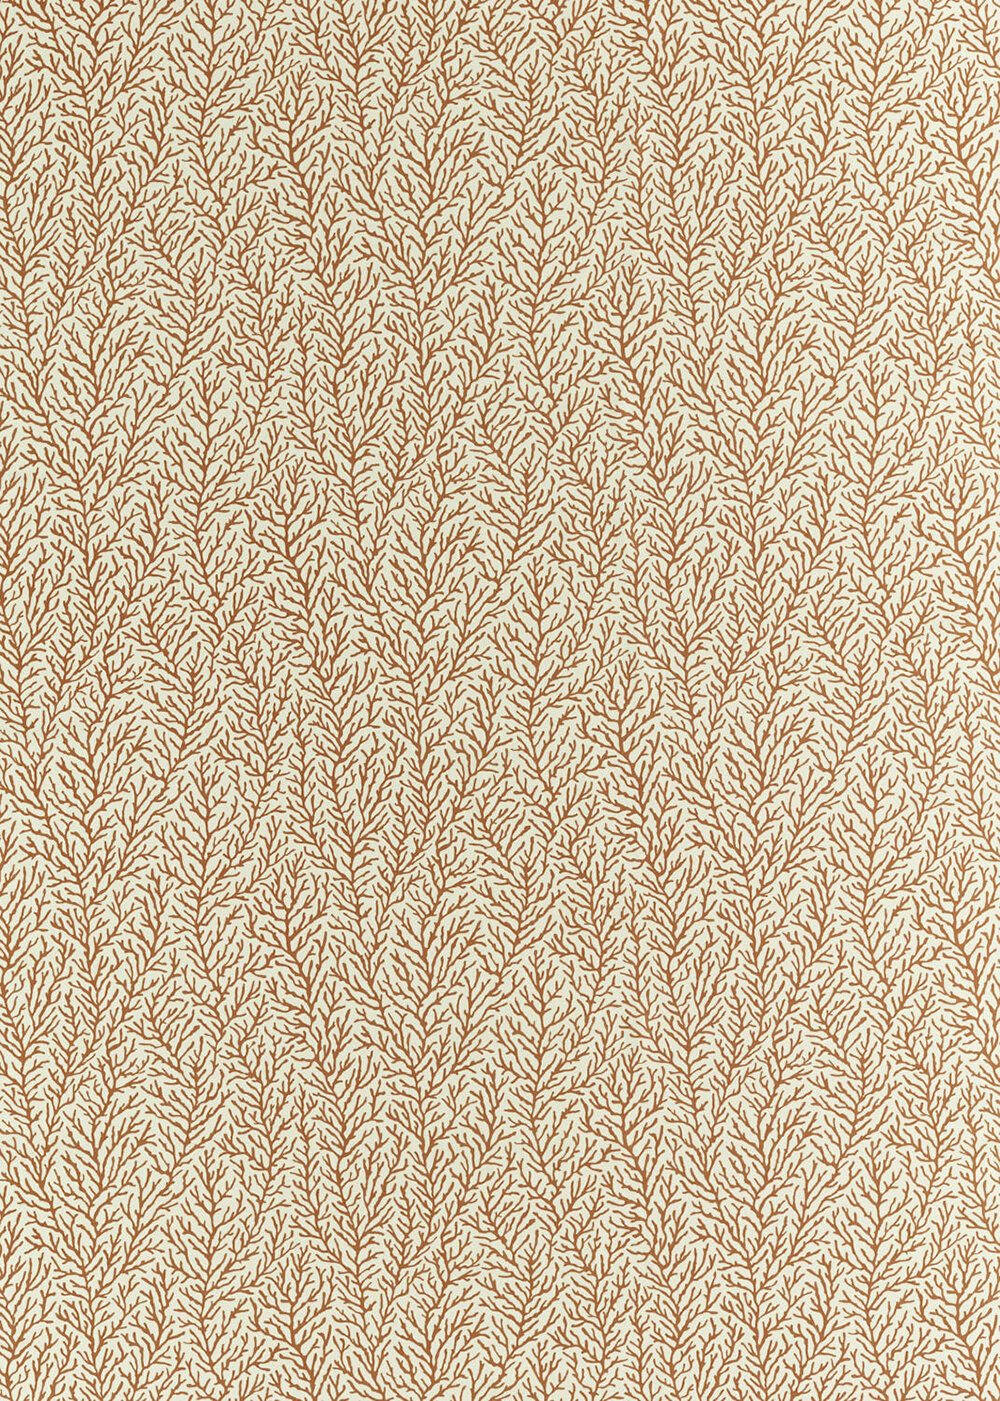 Atoll  Fabric - Bronze/ Sailcloth - by Harlequin